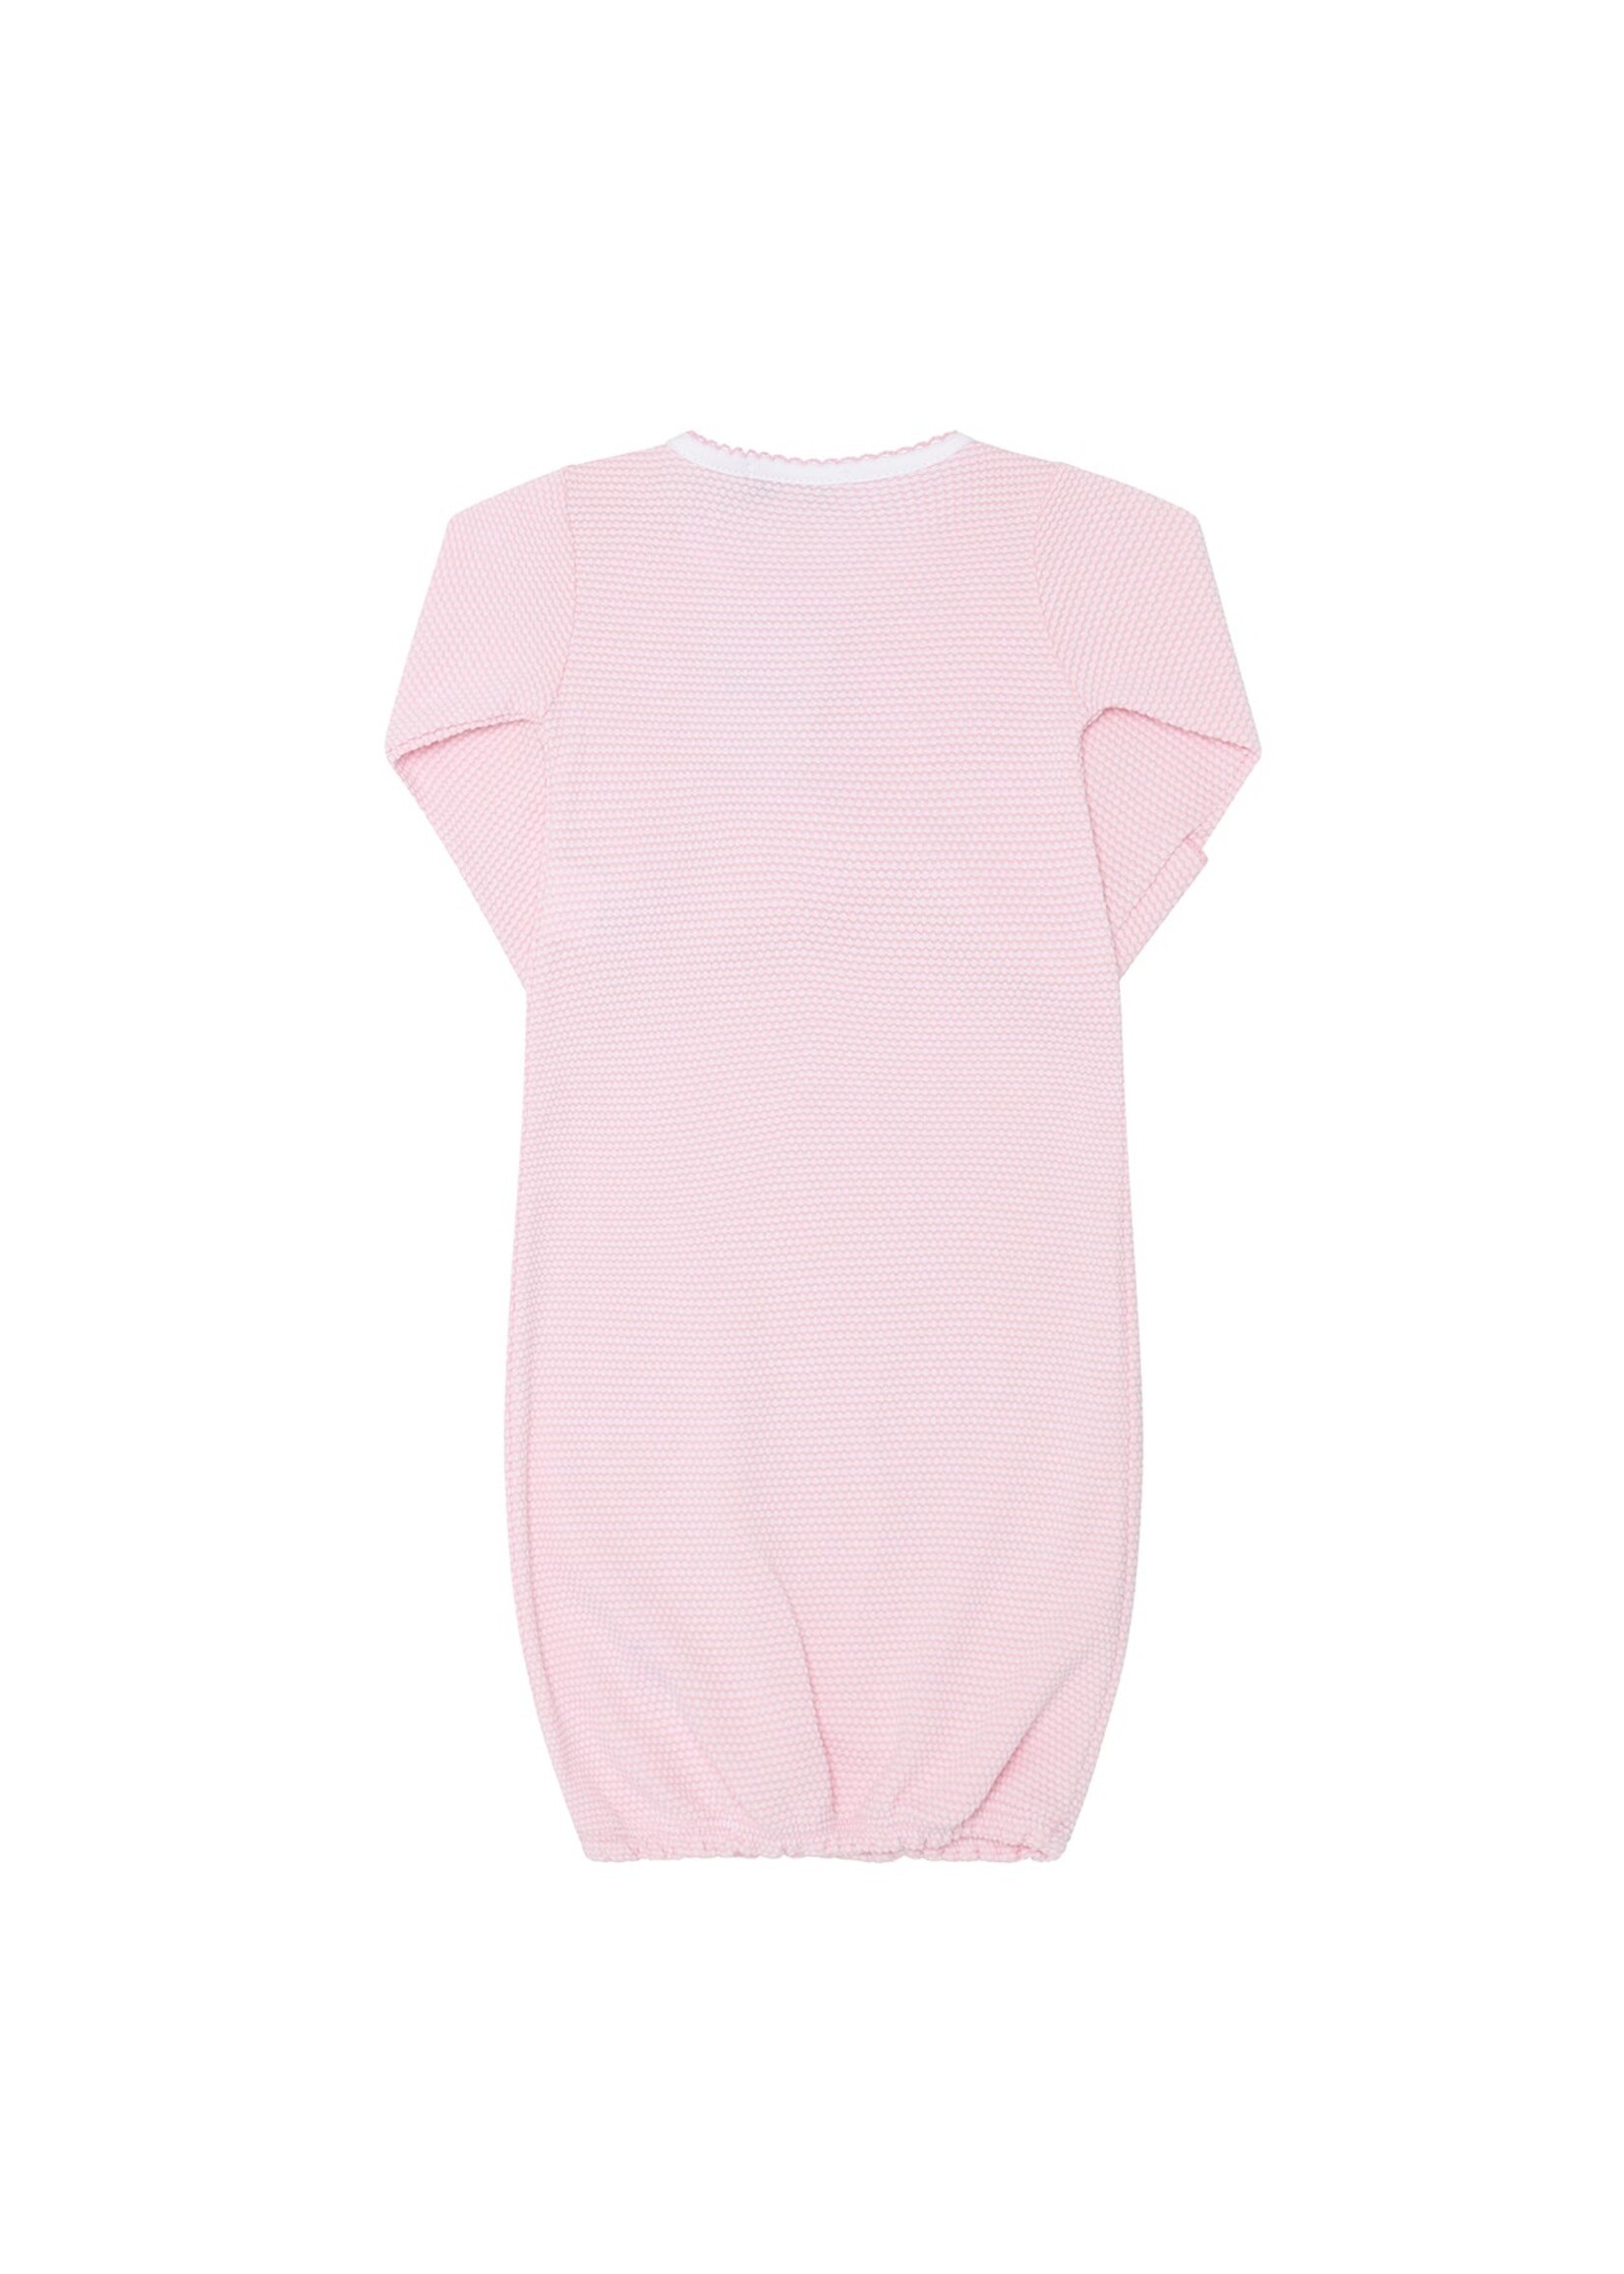 Nellapima Pink Bubble Gown 0-3 months